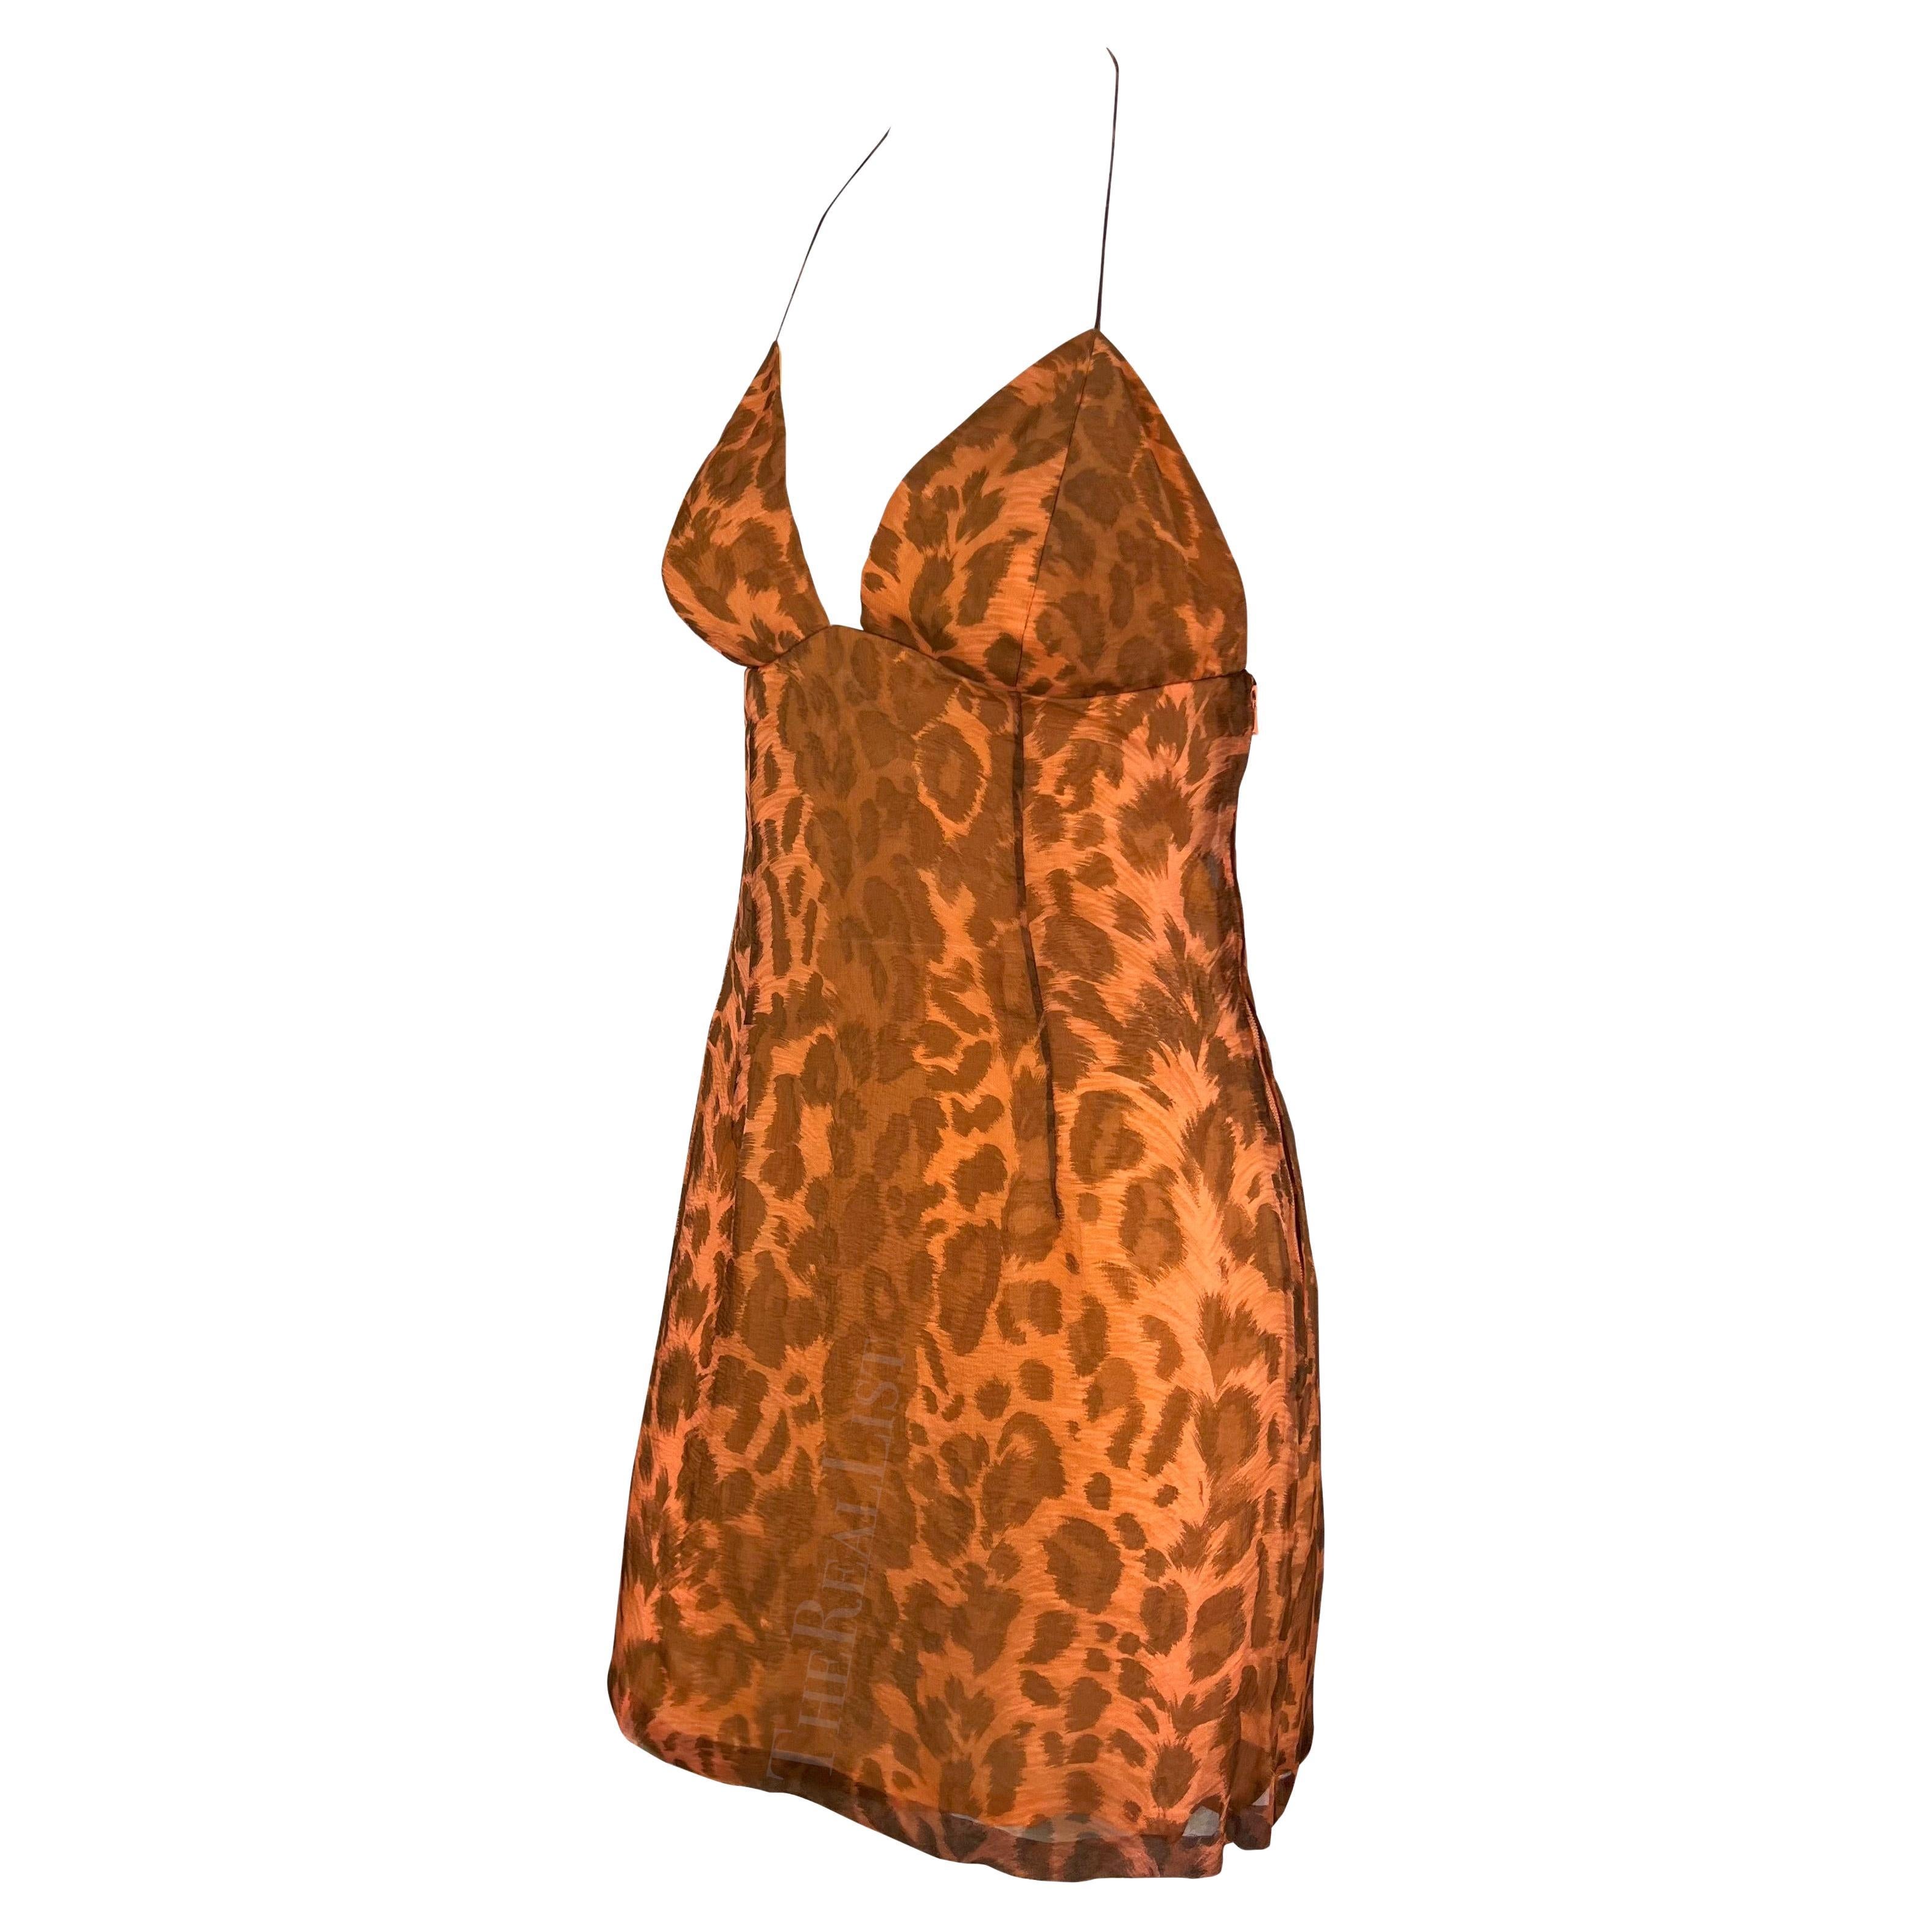 S/S 1997 Jacques Fath Runway Orange Cheetah Print Halterneck Mini Dress In Excellent Condition For Sale In West Hollywood, CA